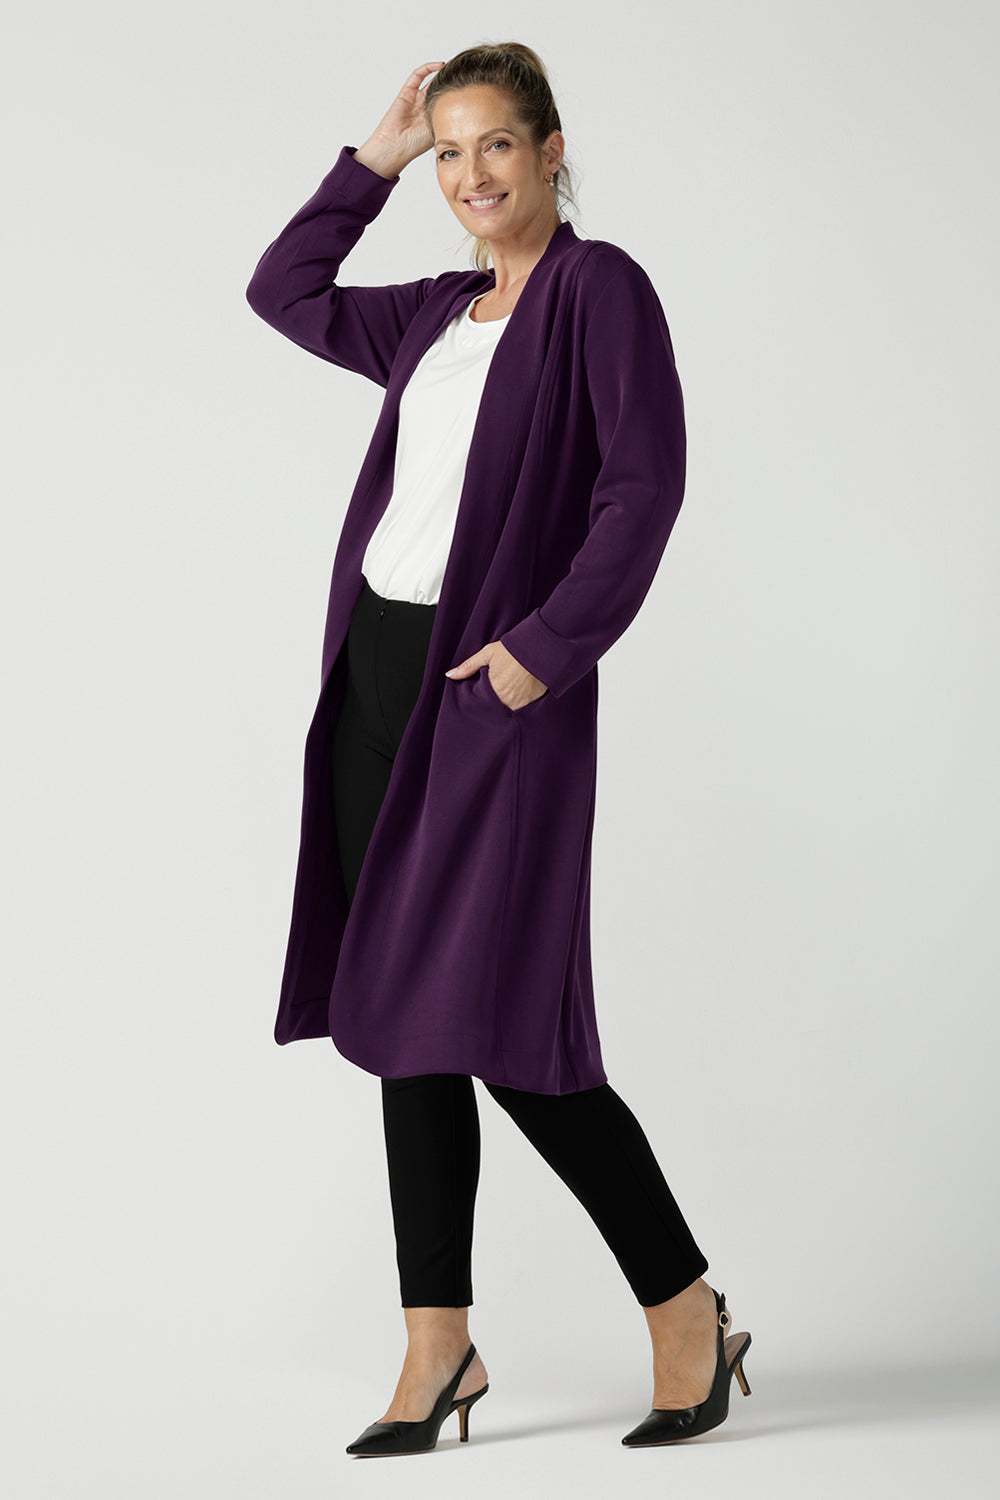 A size 10 woman wears the Sorel Trenchcoat in Amethyst. Inner seam pockets with, long sleeves with wrap tie. Made in Australia using soft modal scuba material. Made in Australia for women size 8 - 24.